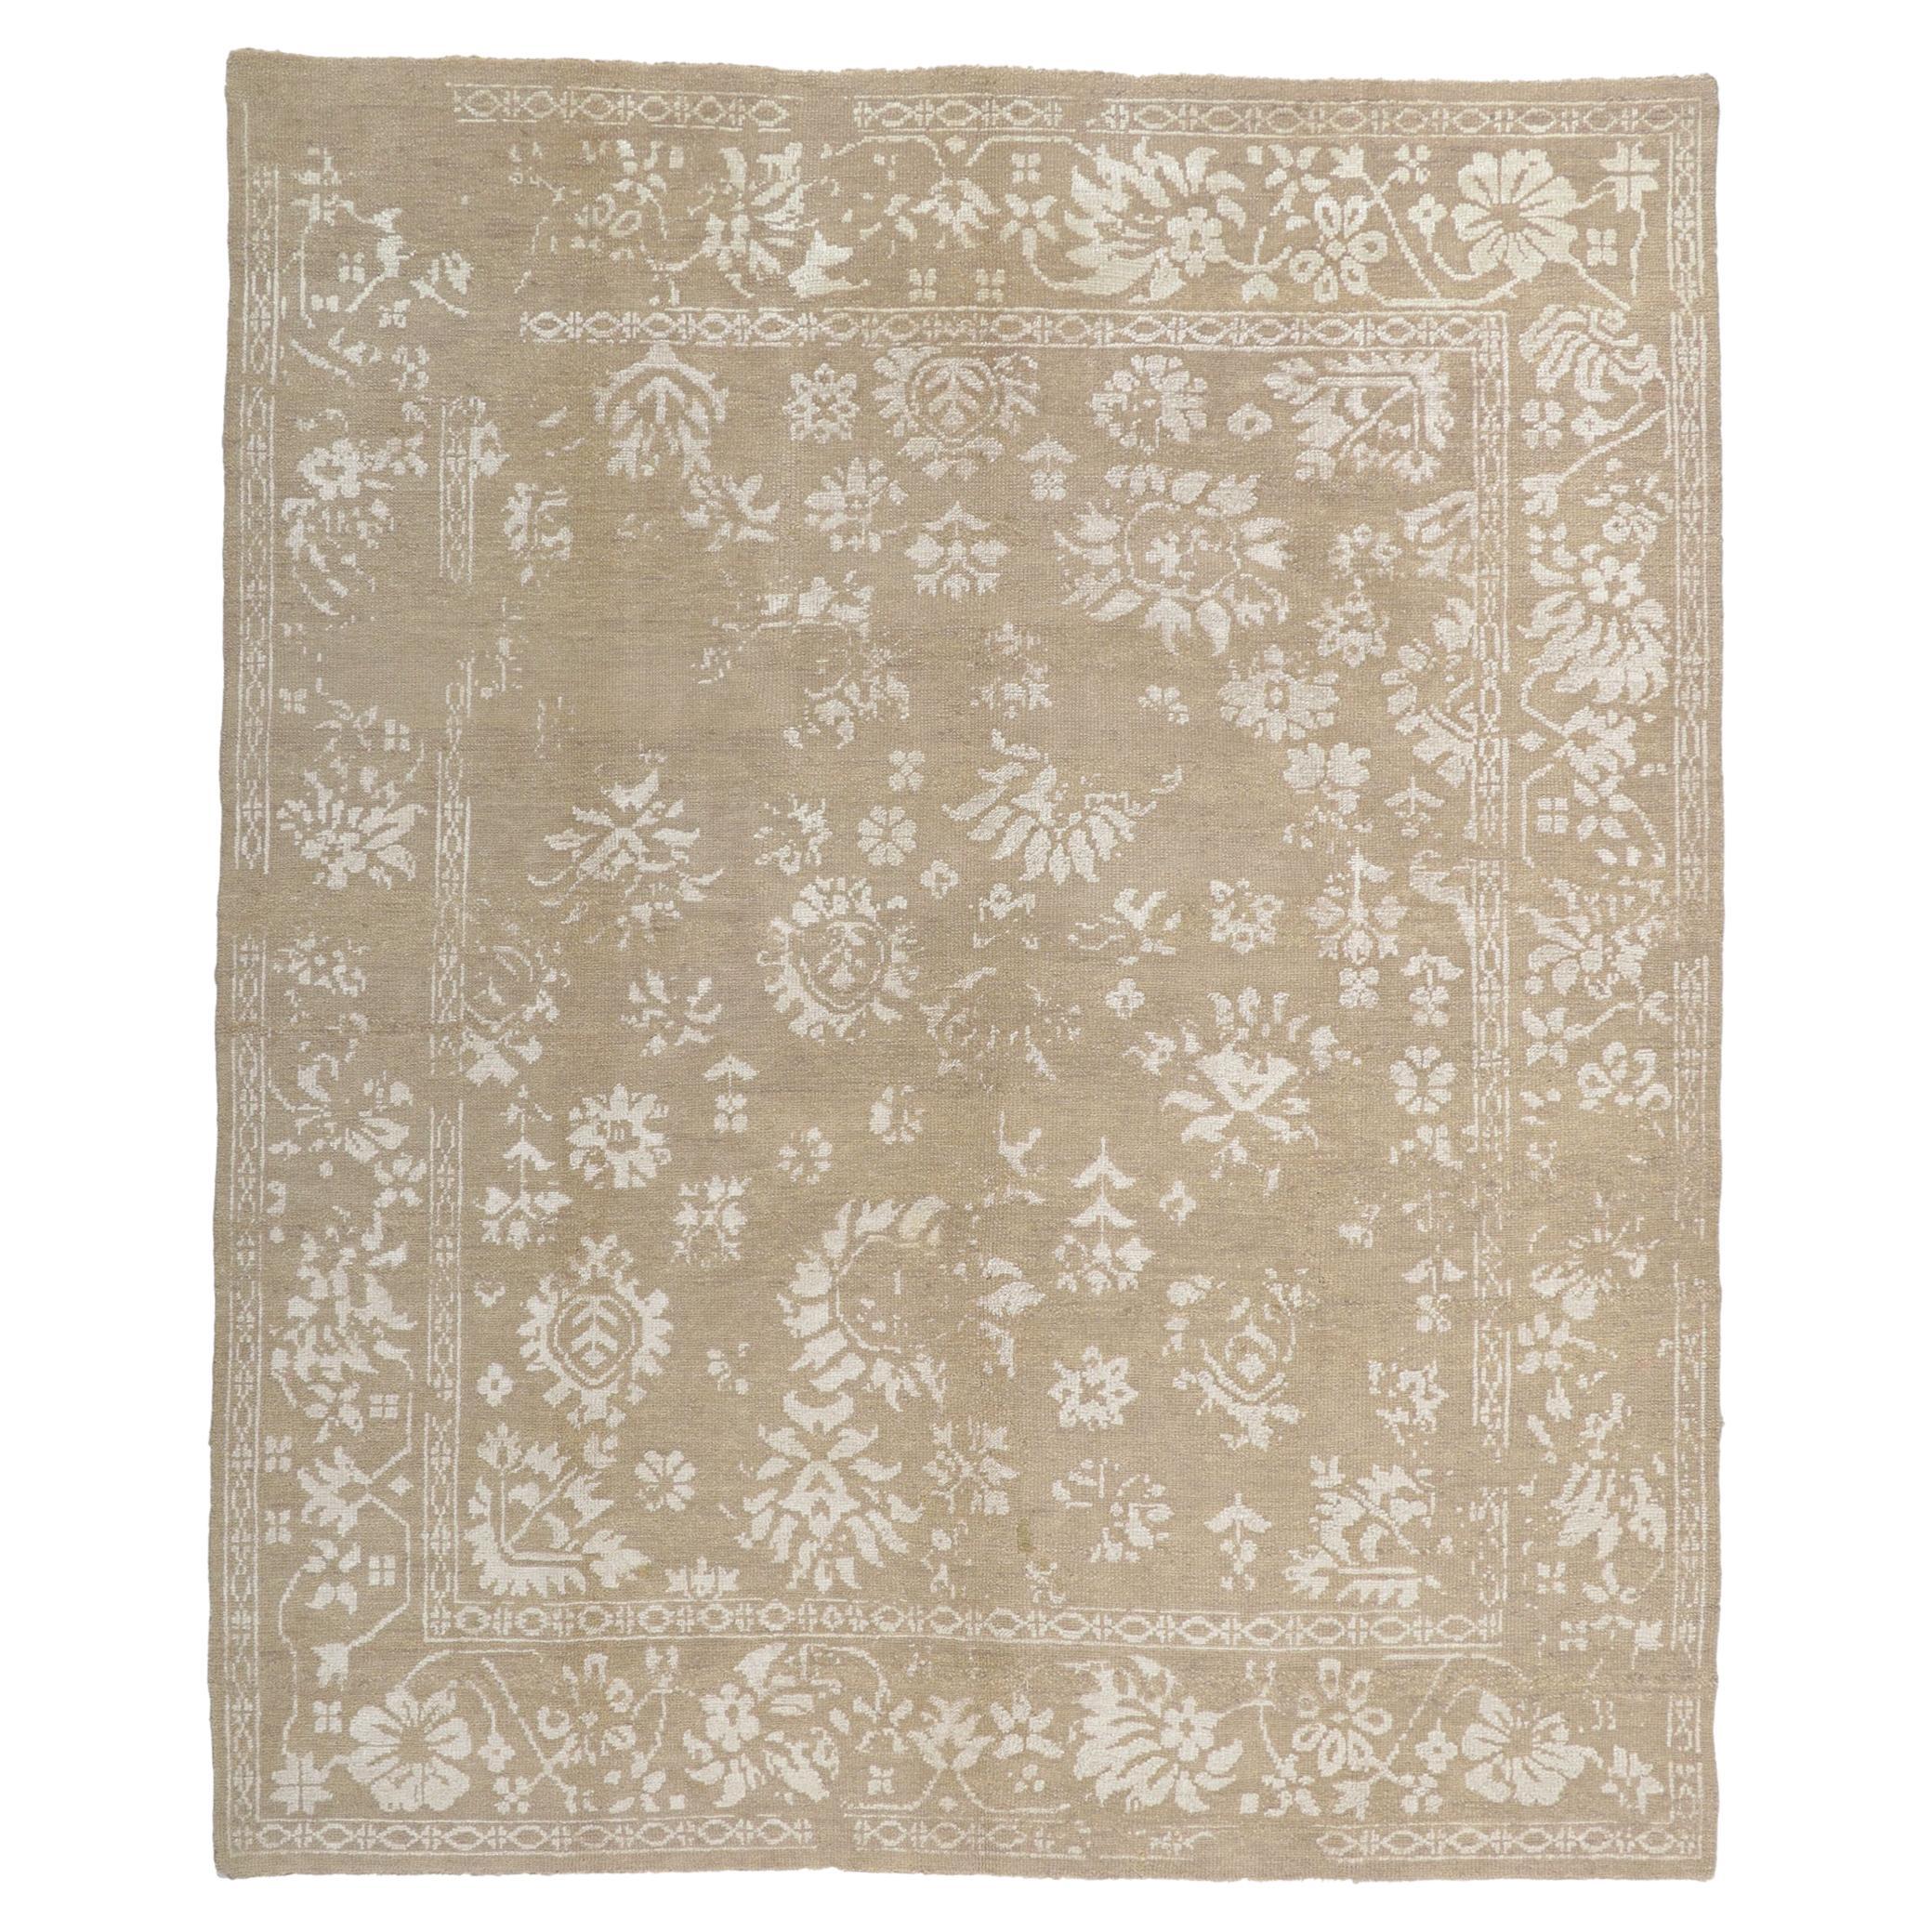 New Vintage-Inspired Transitional Rug with Soft Earth-Tone Colors For Sale